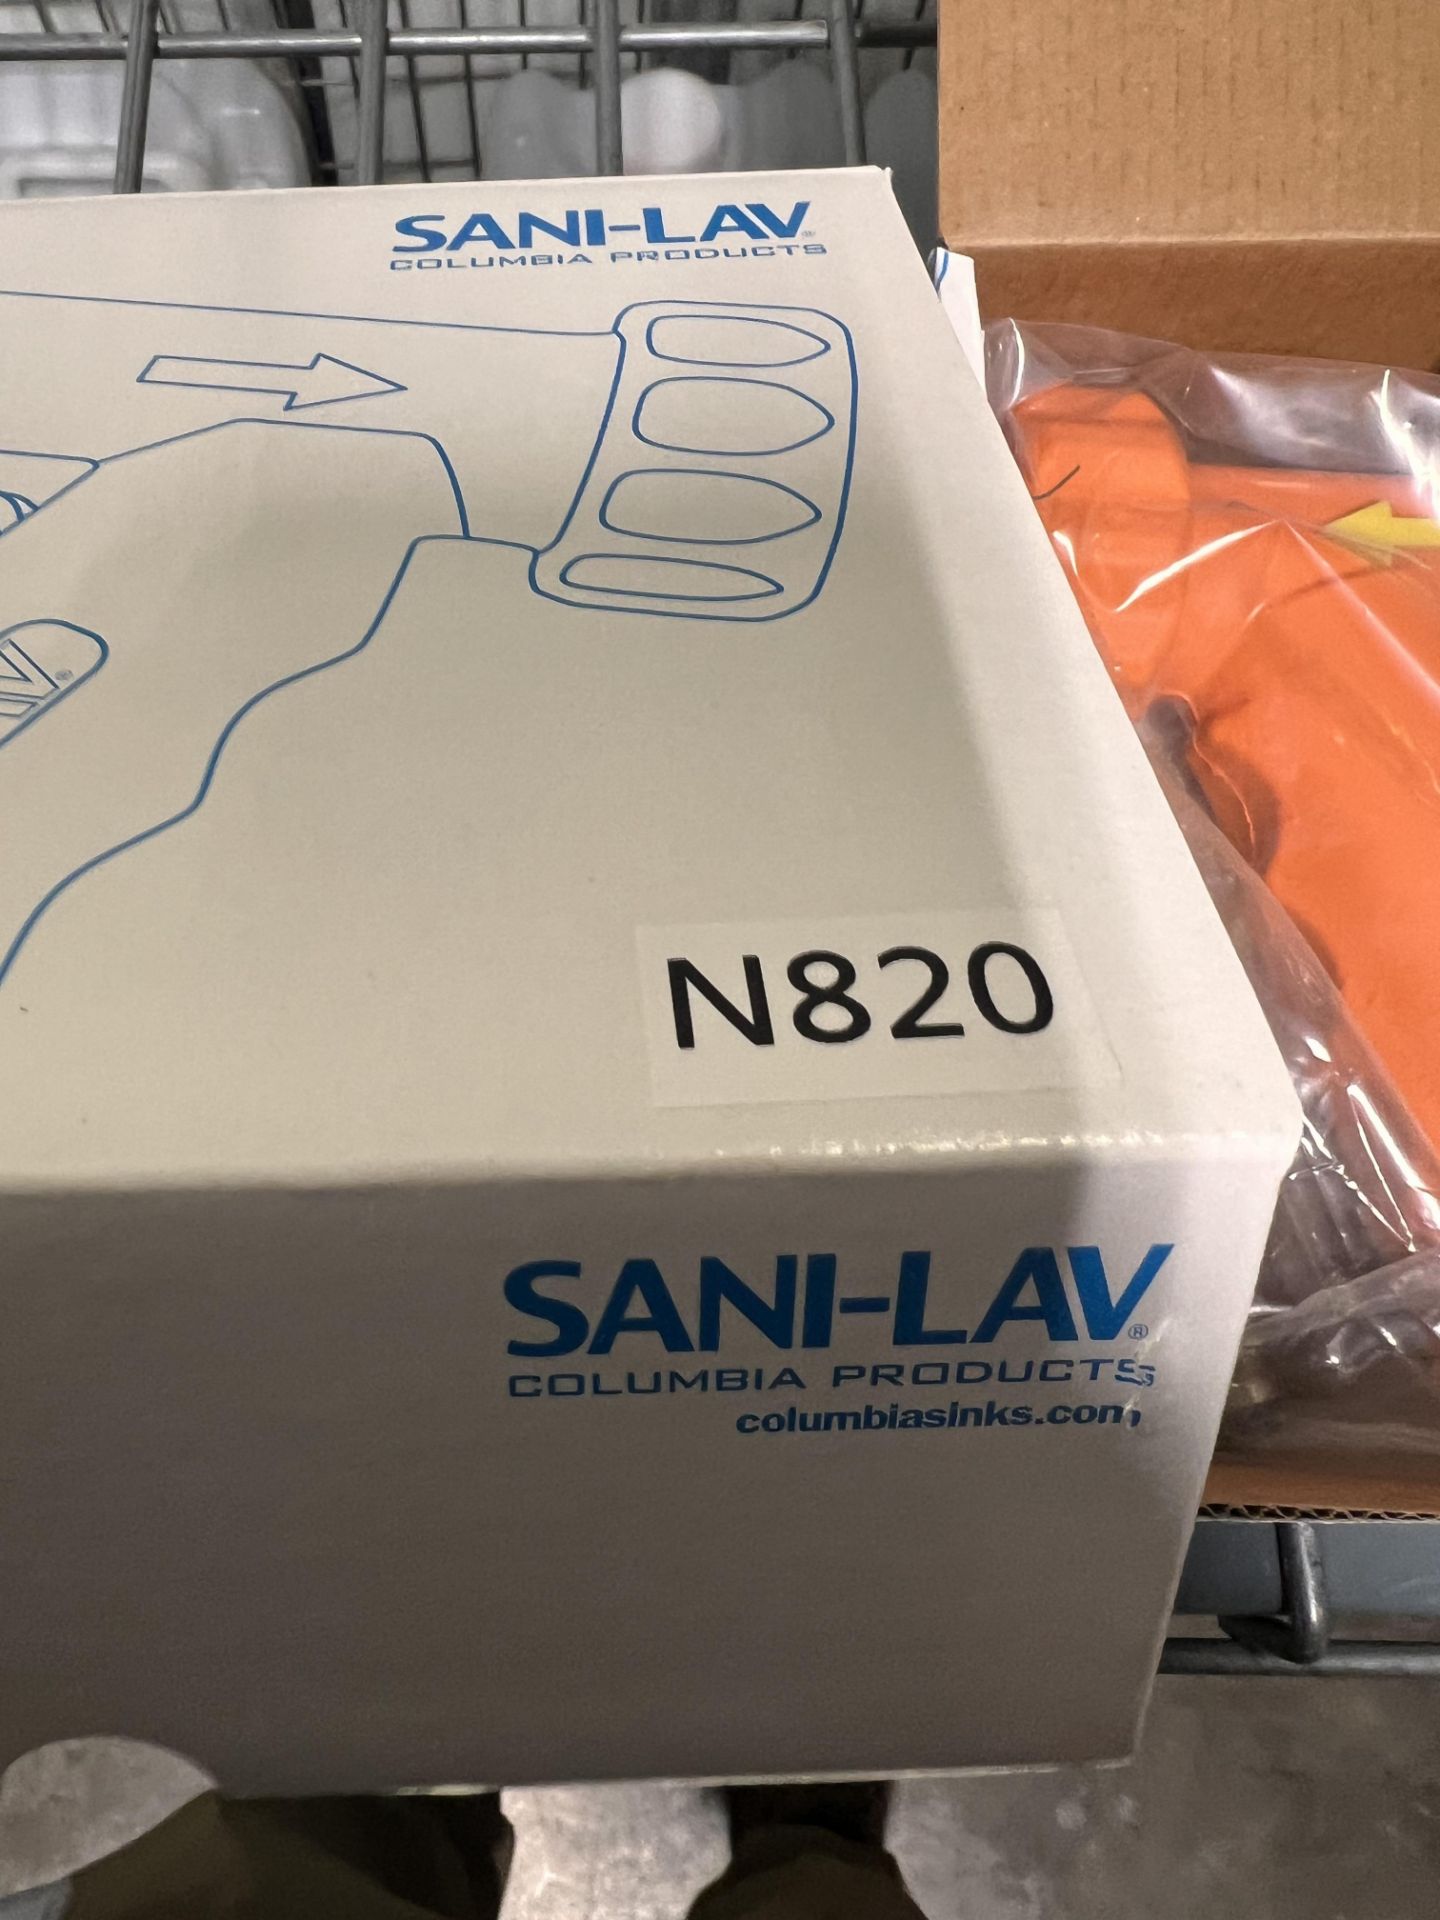 (2) NEW SANI-LAV HOT/COLD HOSE SPRAY NOZZLES, MODEL N820 - Image 7 of 8